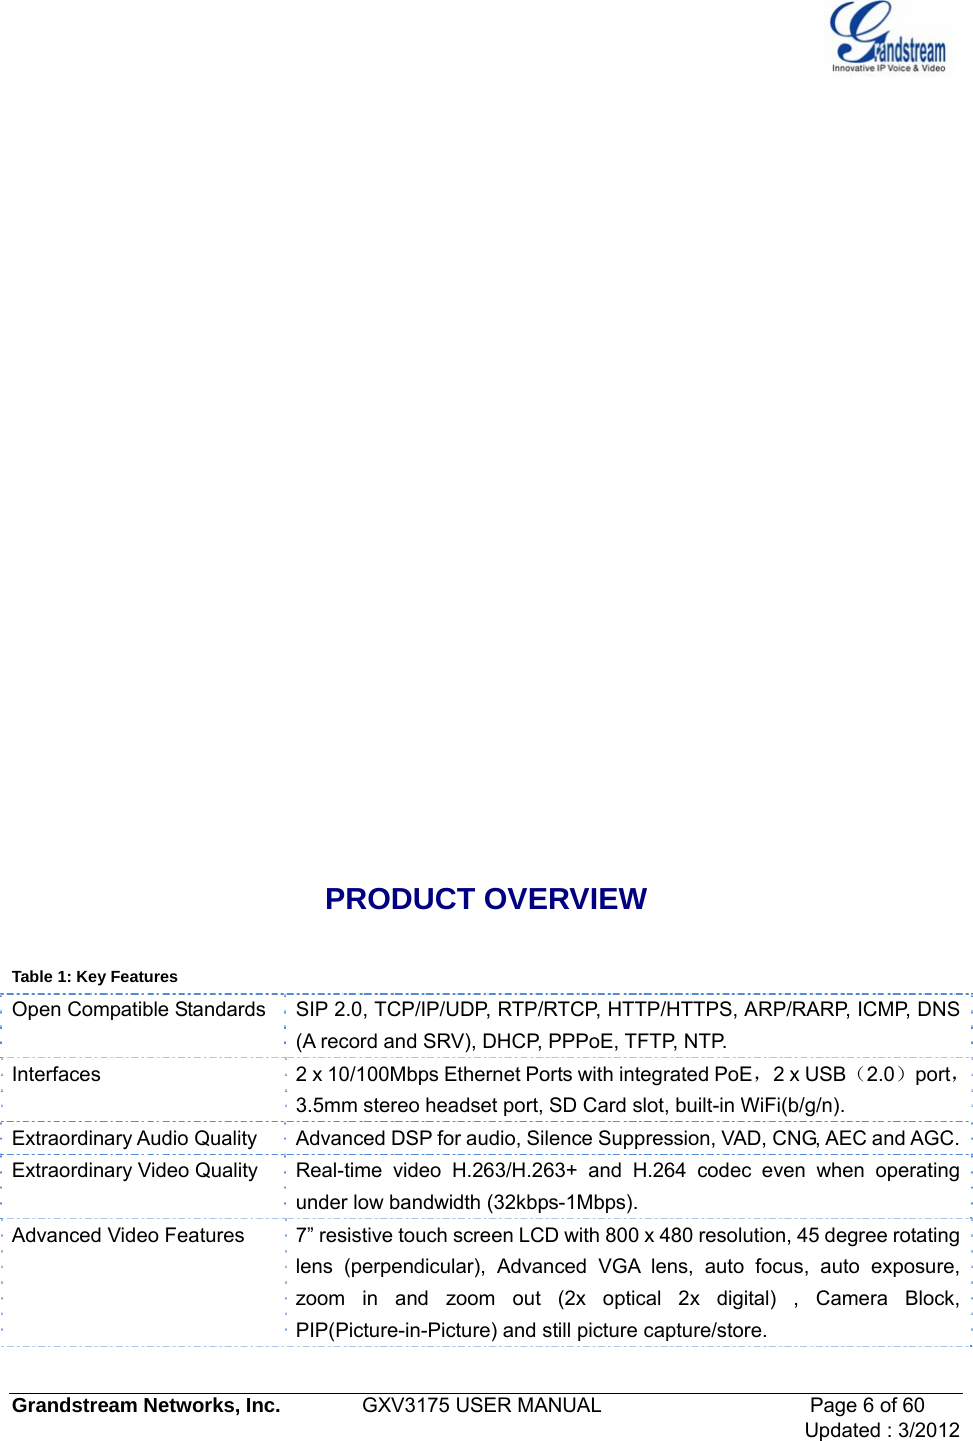   Grandstream Networks, Inc.        GXV3175 USER MANUAL                     Page 6 of 60                                 Updated : 3/2012               PRODUCT OVERVIEW  Table 1: Key Features Open Compatible Standards  SIP 2.0, TCP/IP/UDP, RTP/RTCP, HTTP/HTTPS, ARP/RARP, ICMP, DNS (A record and SRV), DHCP, PPPoE, TFTP, NTP. Interfaces  2 x 10/100Mbps Ethernet Ports with integrated PoE，2 x USB（2.0）port，3.5mm stereo headset port, SD Card slot, built-in WiFi(b/g/n). Extraordinary Audio Quality  Advanced DSP for audio, Silence Suppression, VAD, CNG, AEC and AGC.Extraordinary Video Quality  Real-time video H.263/H.263+ and H.264 codec even when operating under low bandwidth (32kbps-1Mbps). Advanced Video Features  7” resistive touch screen LCD with 800 x 480 resolution, 45 degree rotating lens (perpendicular), Advanced VGA lens, auto focus, auto exposure, zoom in and zoom out (2x optical 2x digital) , Camera Block, PIP(Picture-in-Picture) and still picture capture/store. 